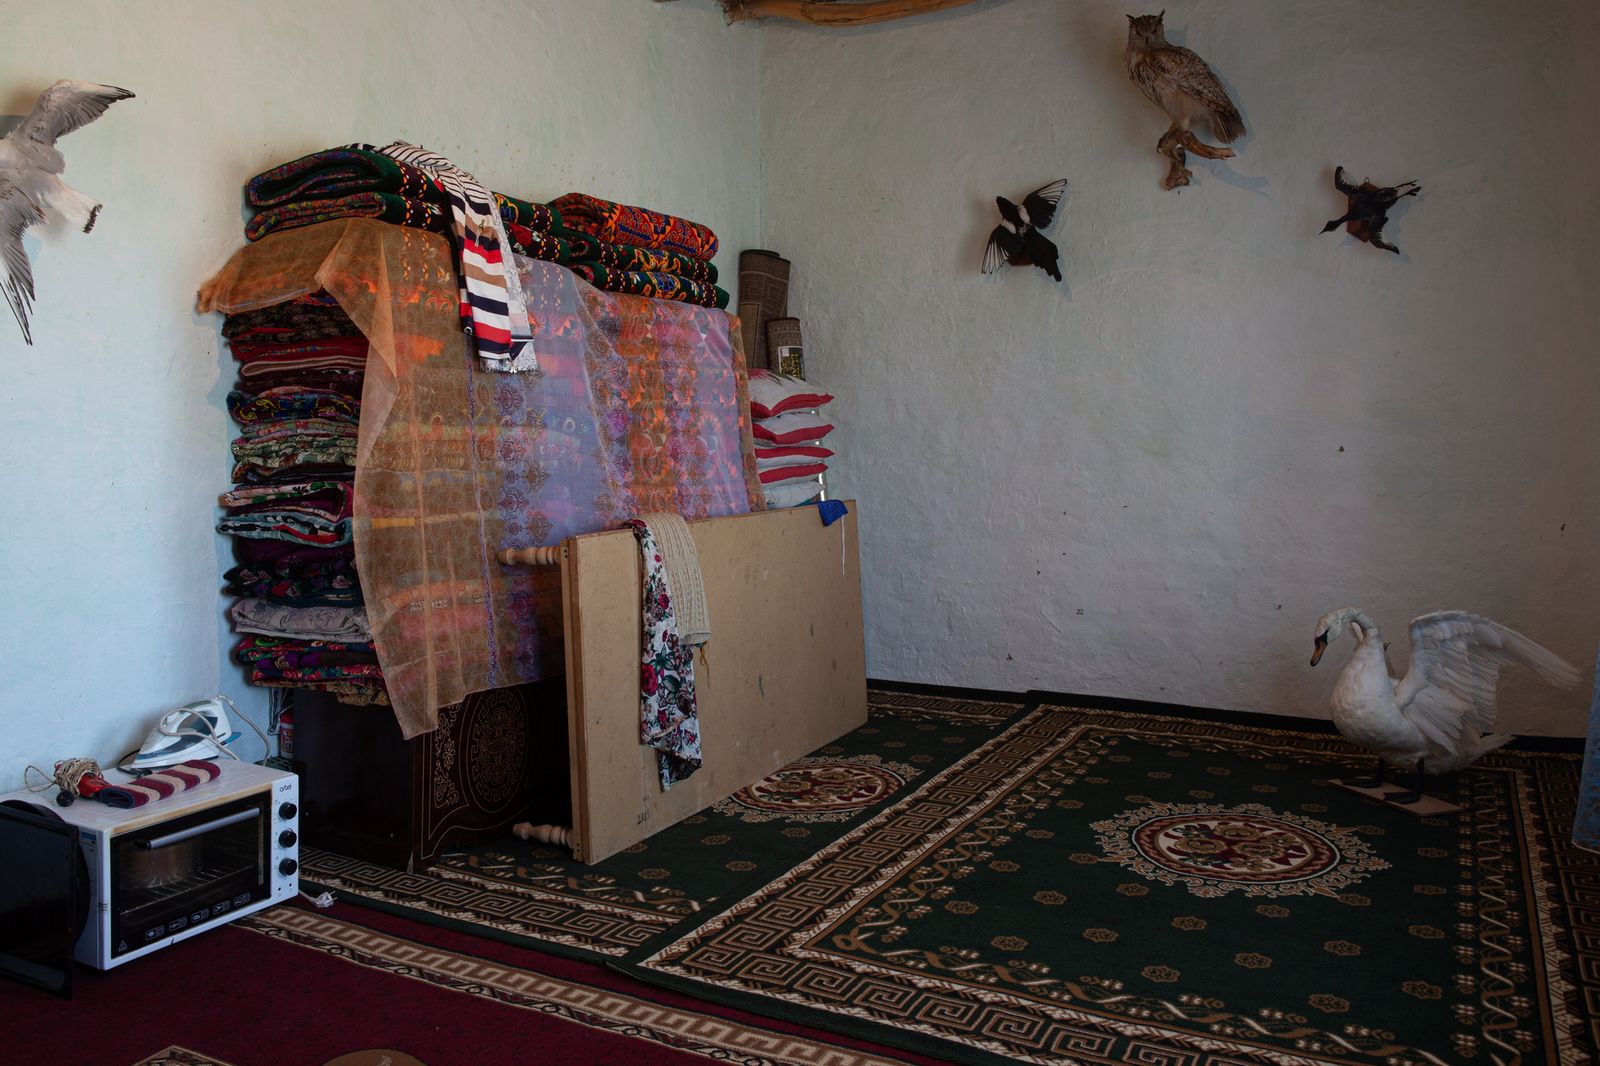 © Iulia Galushina - A room in a home in Shege village is decorated with stuffed animals. Shege village, Uzbekistan.